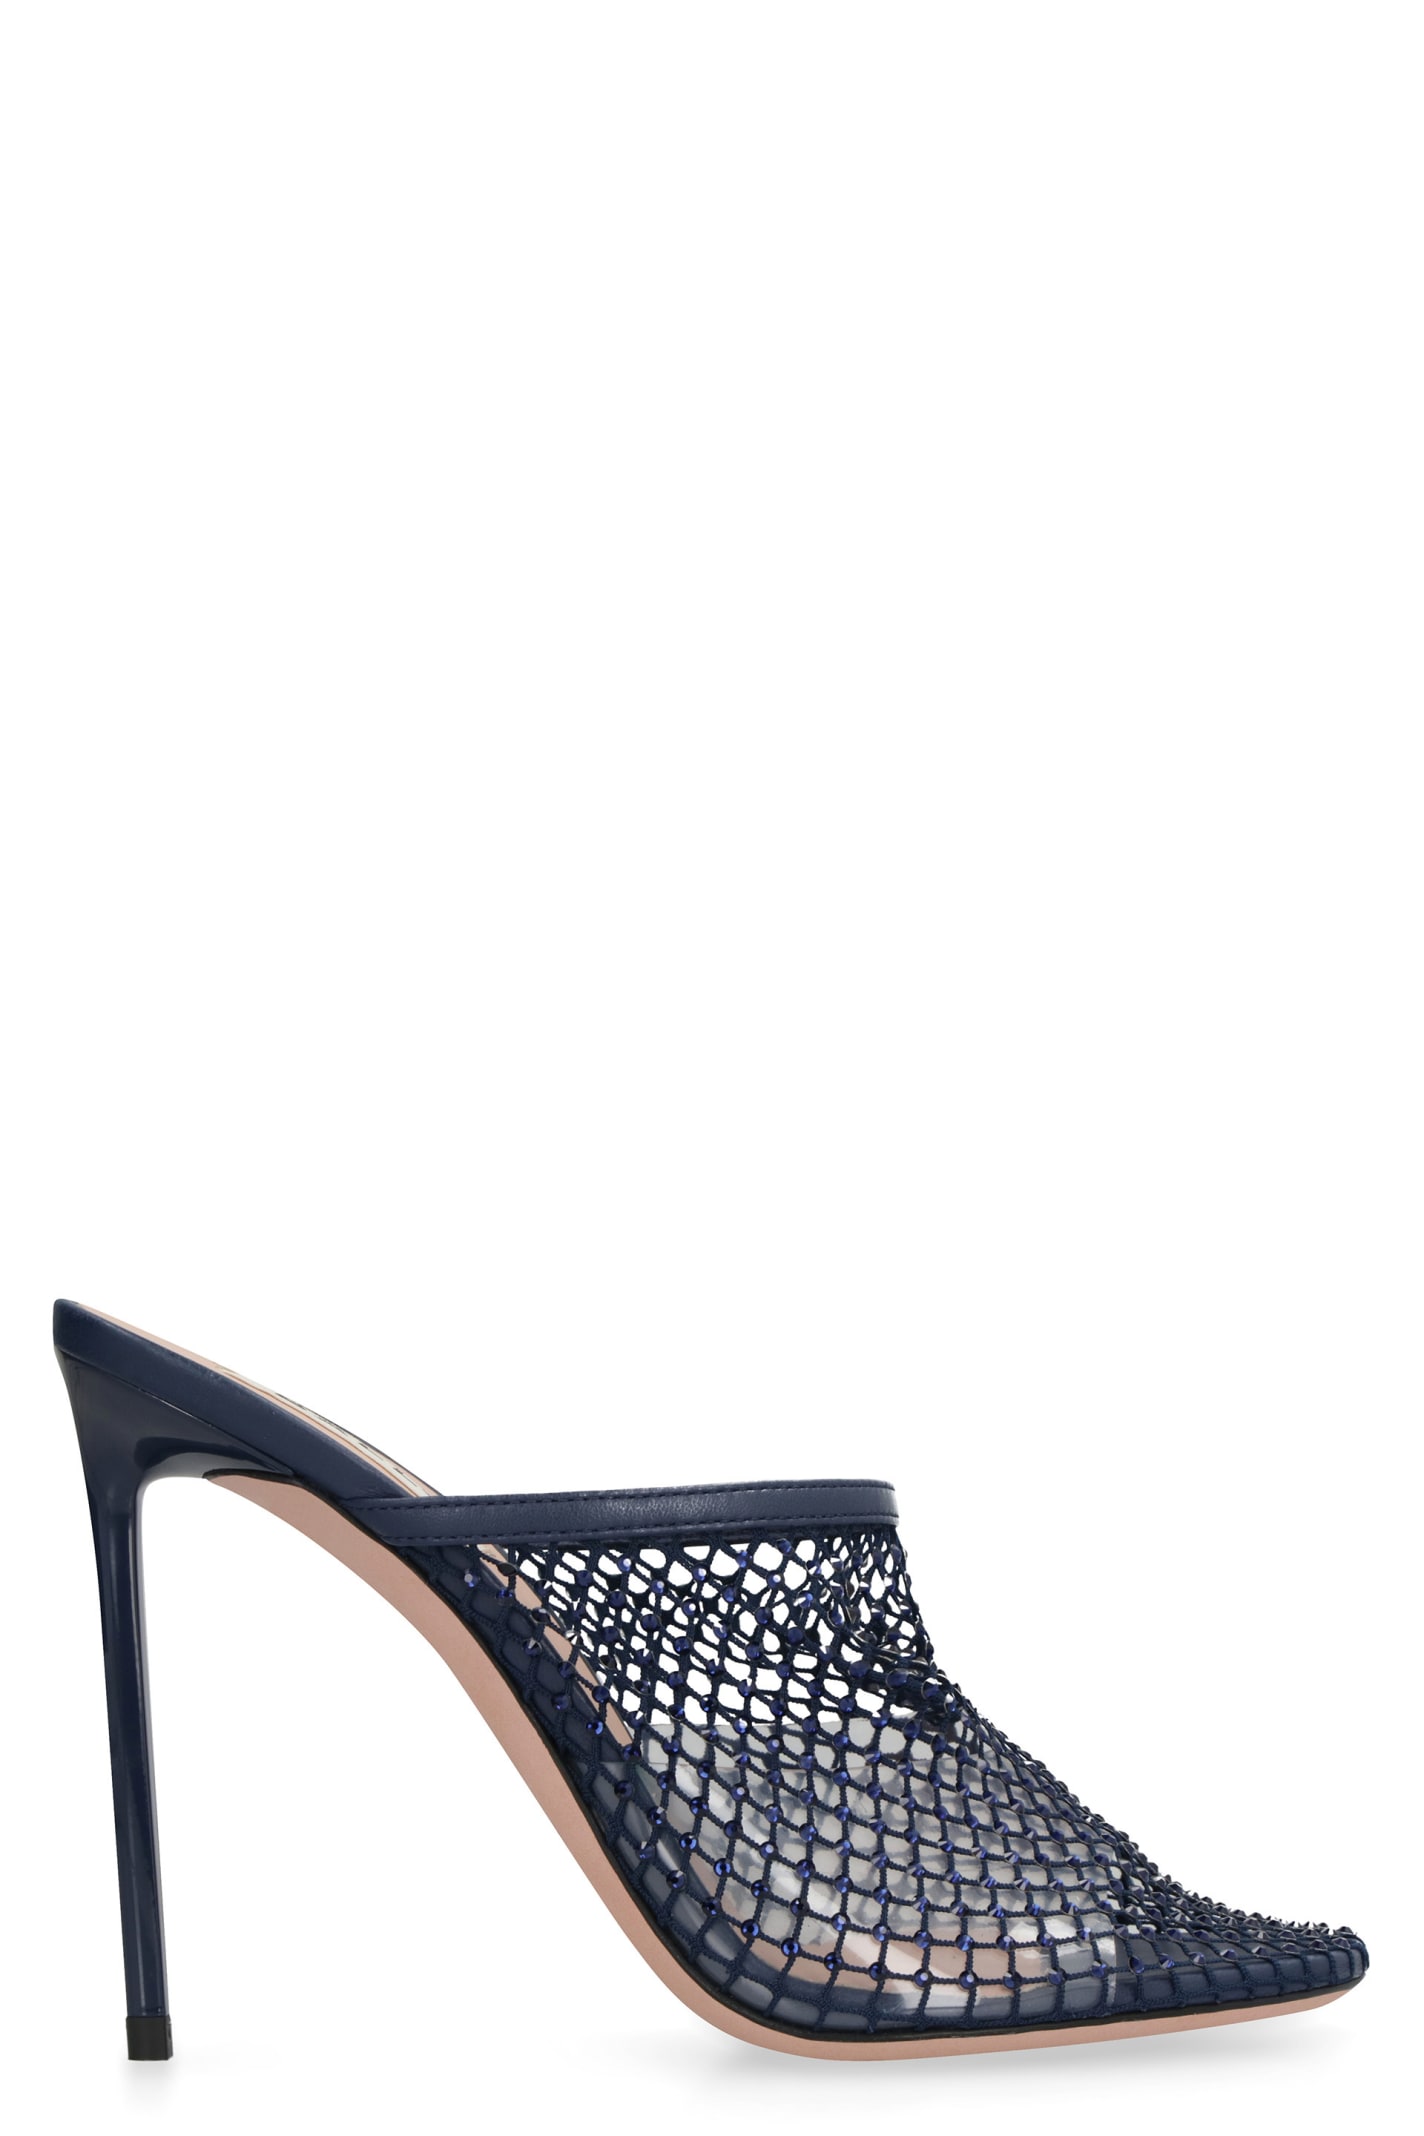 Crystal Fishnet Leather Mules